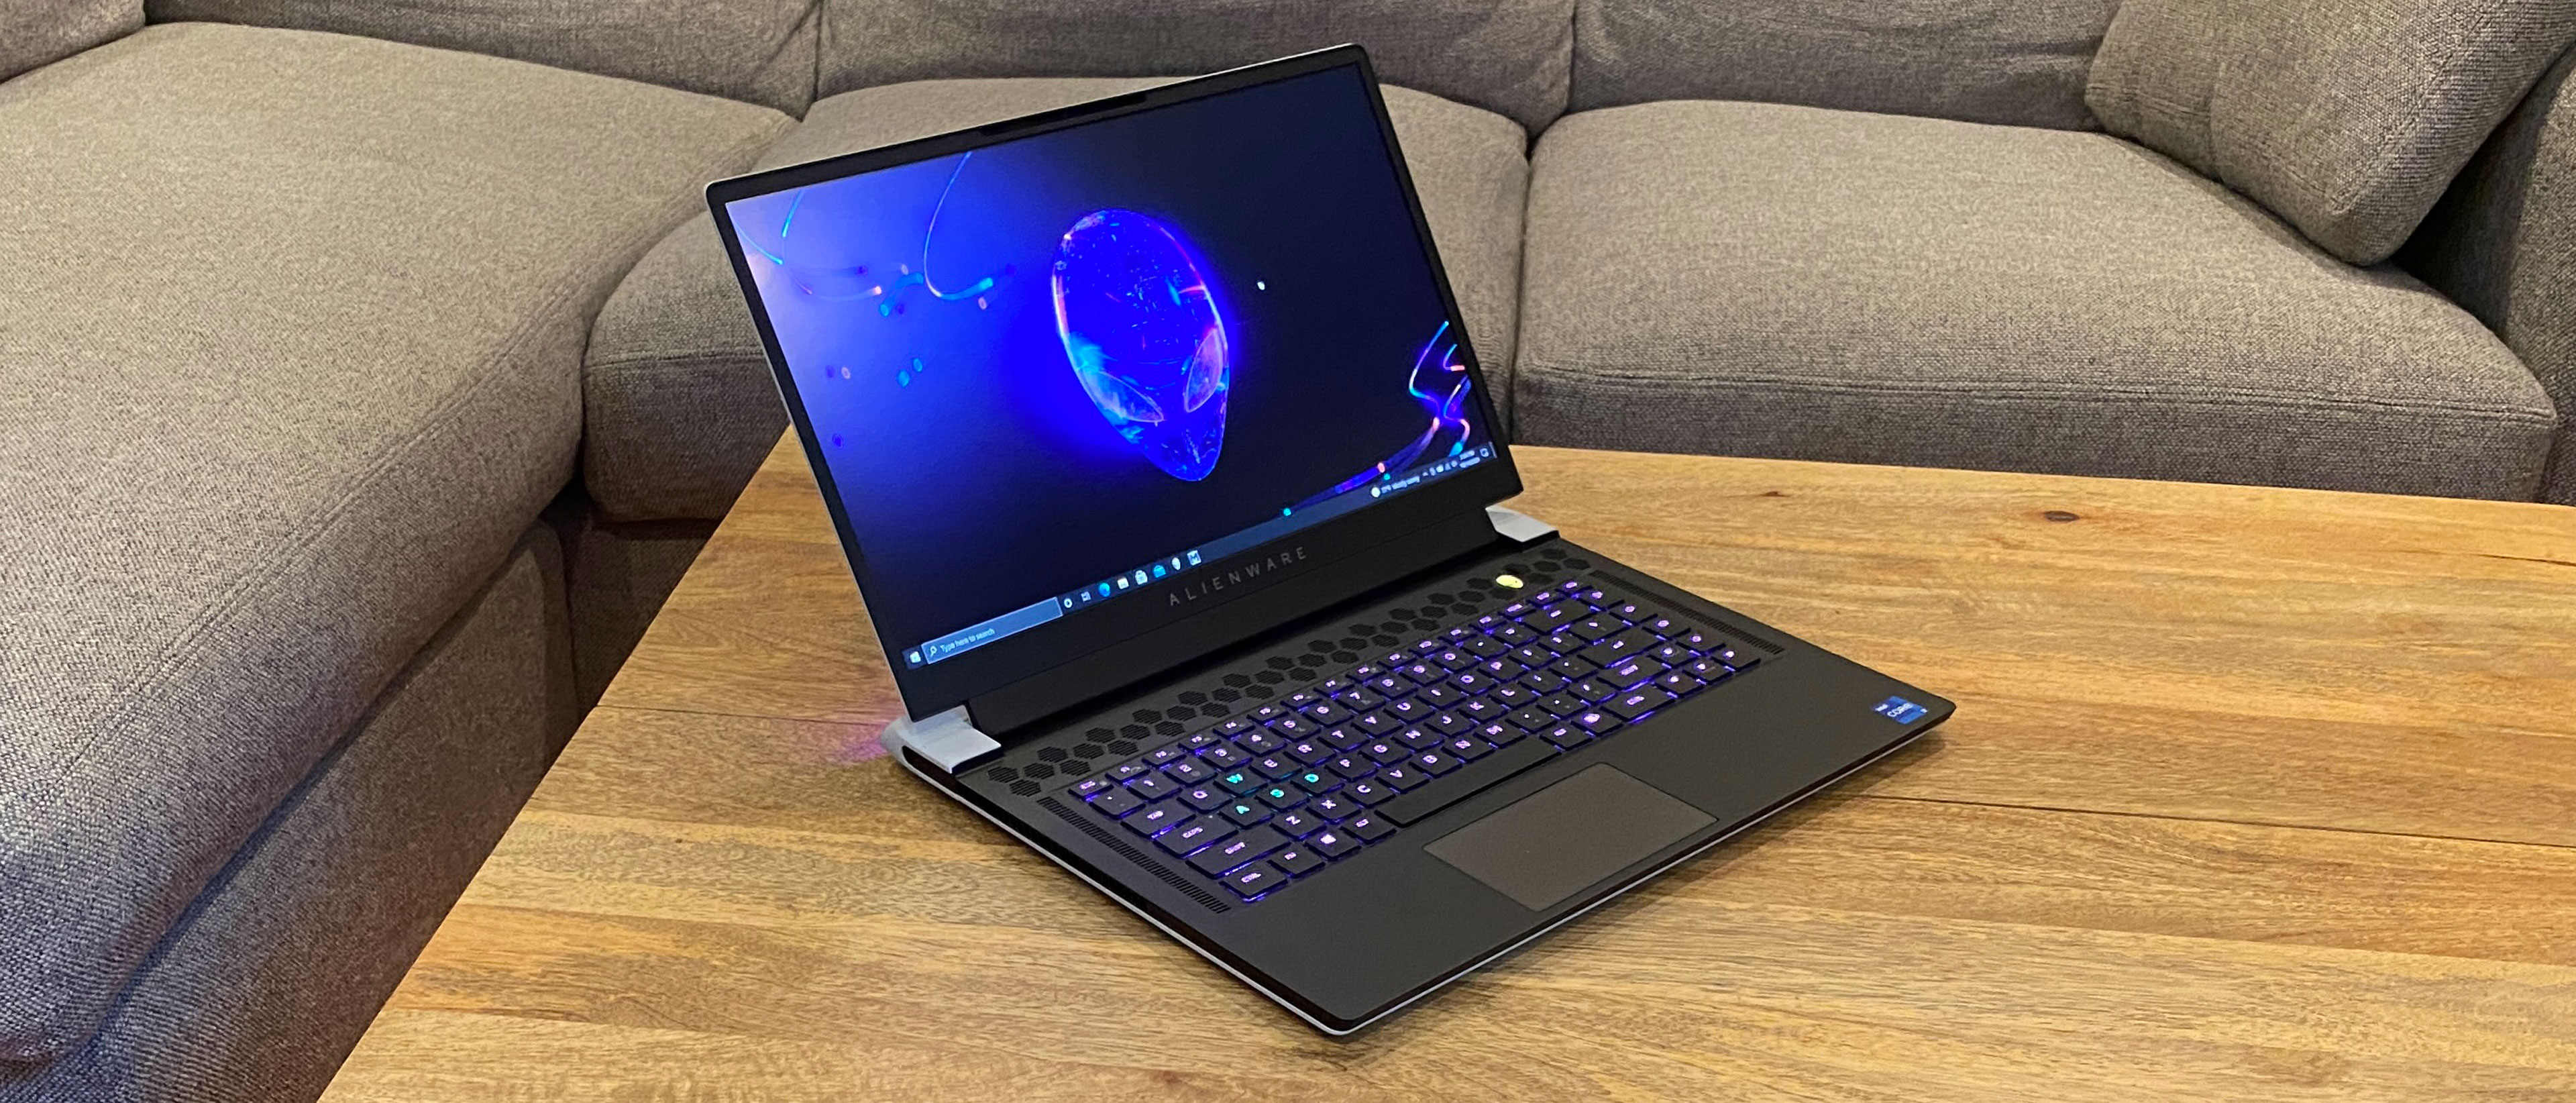 Alienware x15 Review: A Thin, 1440p Machine | Tom's Hardware